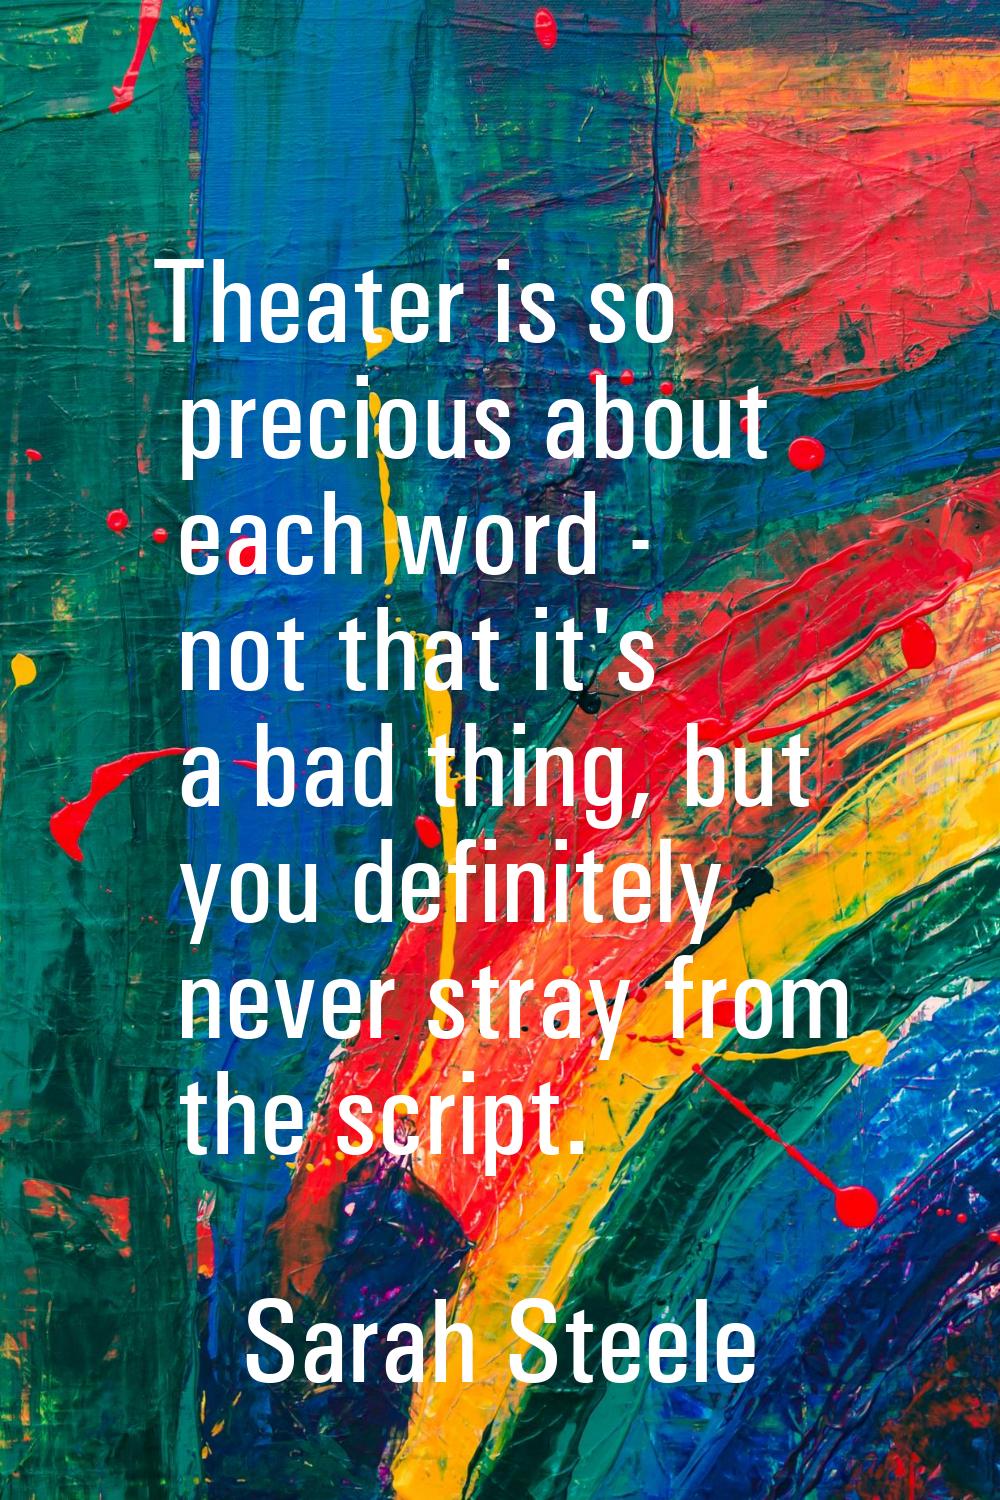 Theater is so precious about each word - not that it's a bad thing, but you definitely never stray 